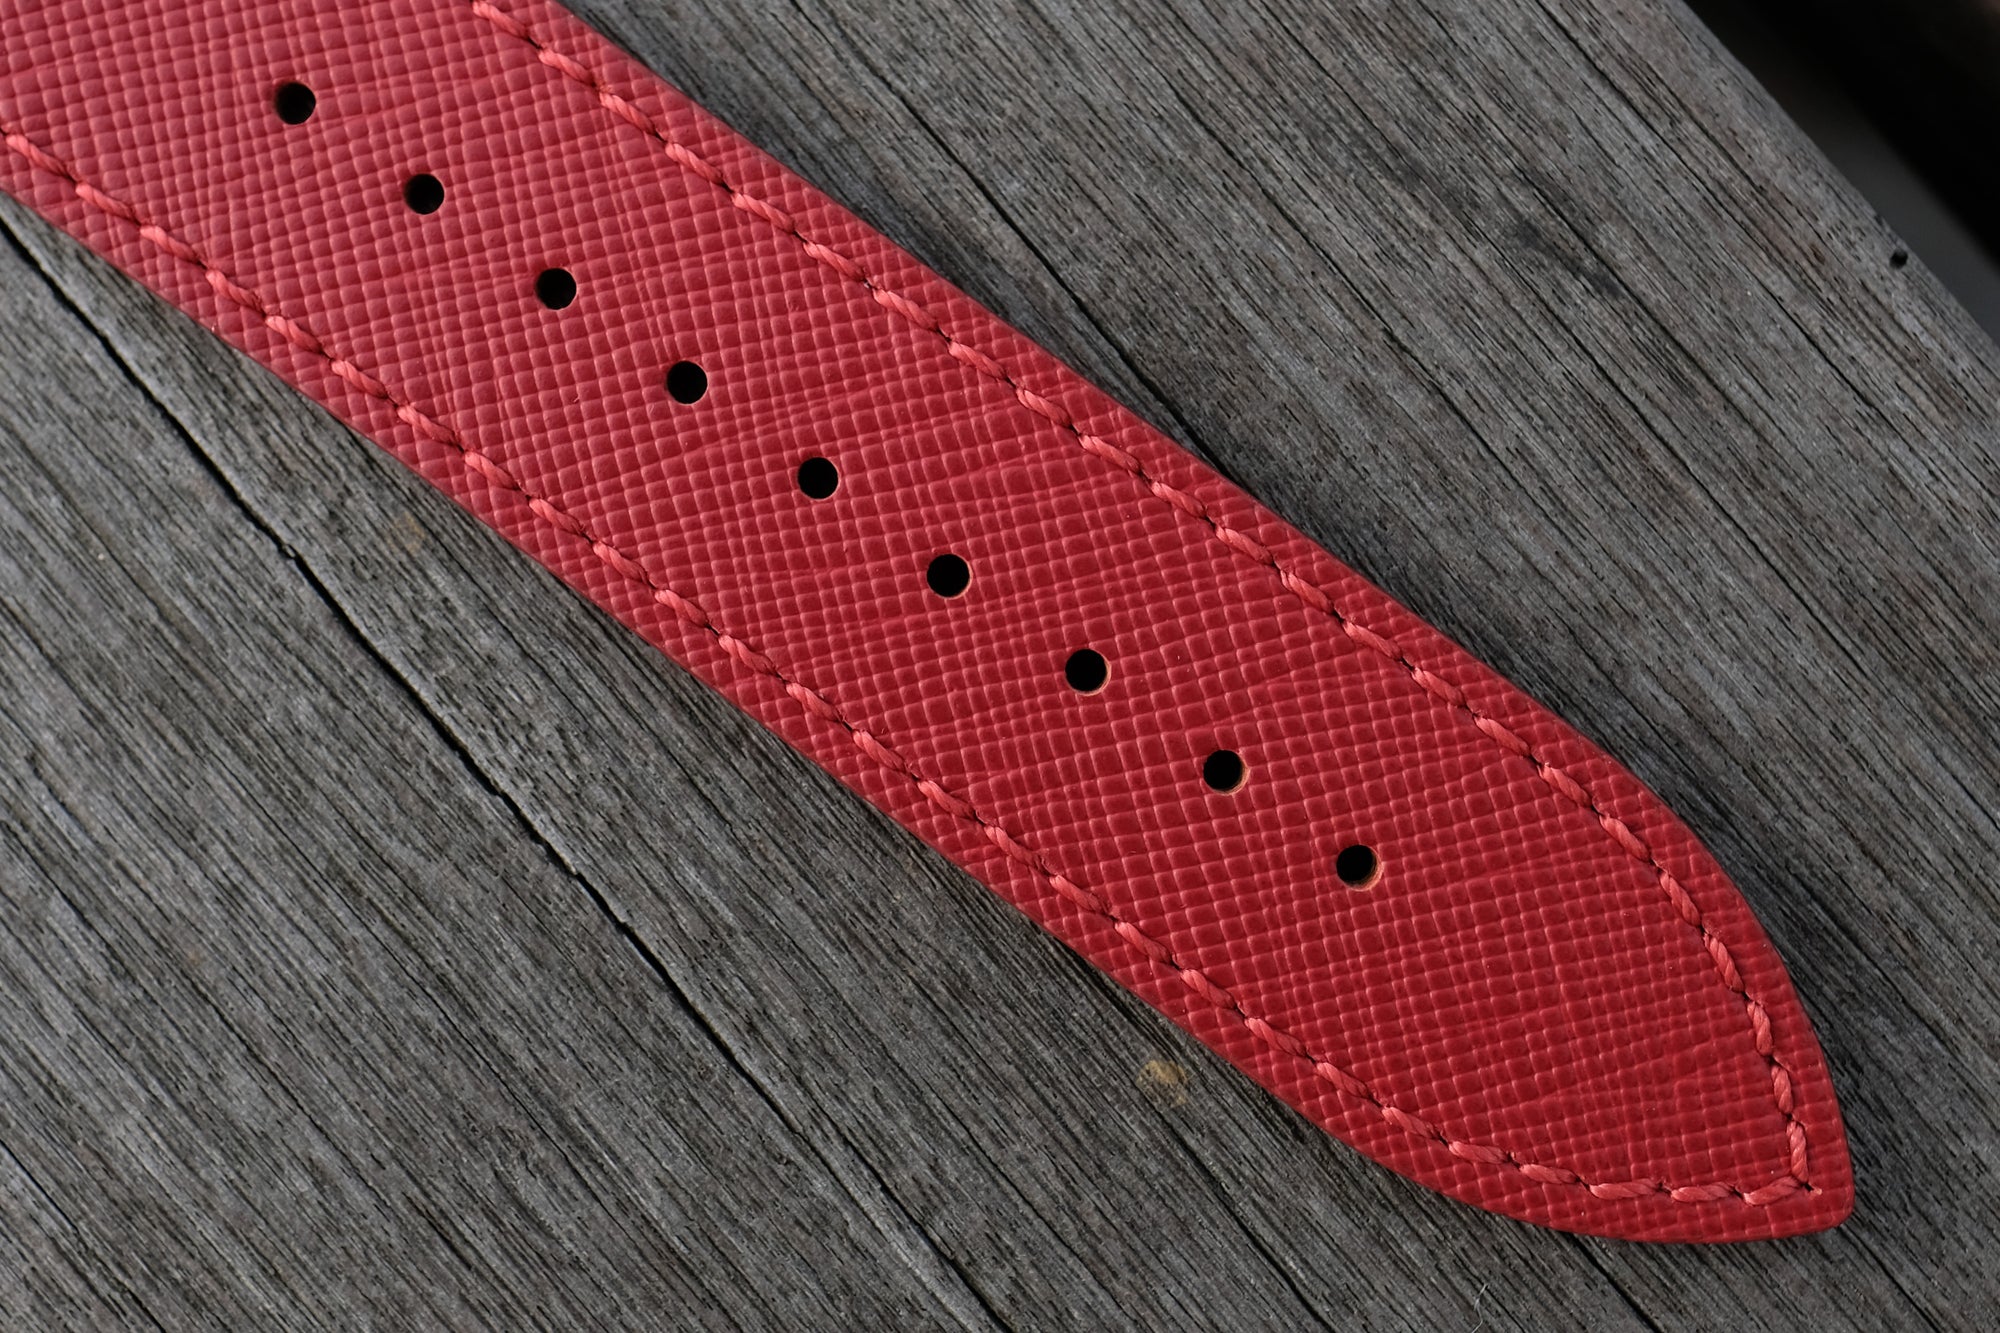 Pin and Buckle Saffiano Leather Apple Watch Bands - Crimson Red - Close up